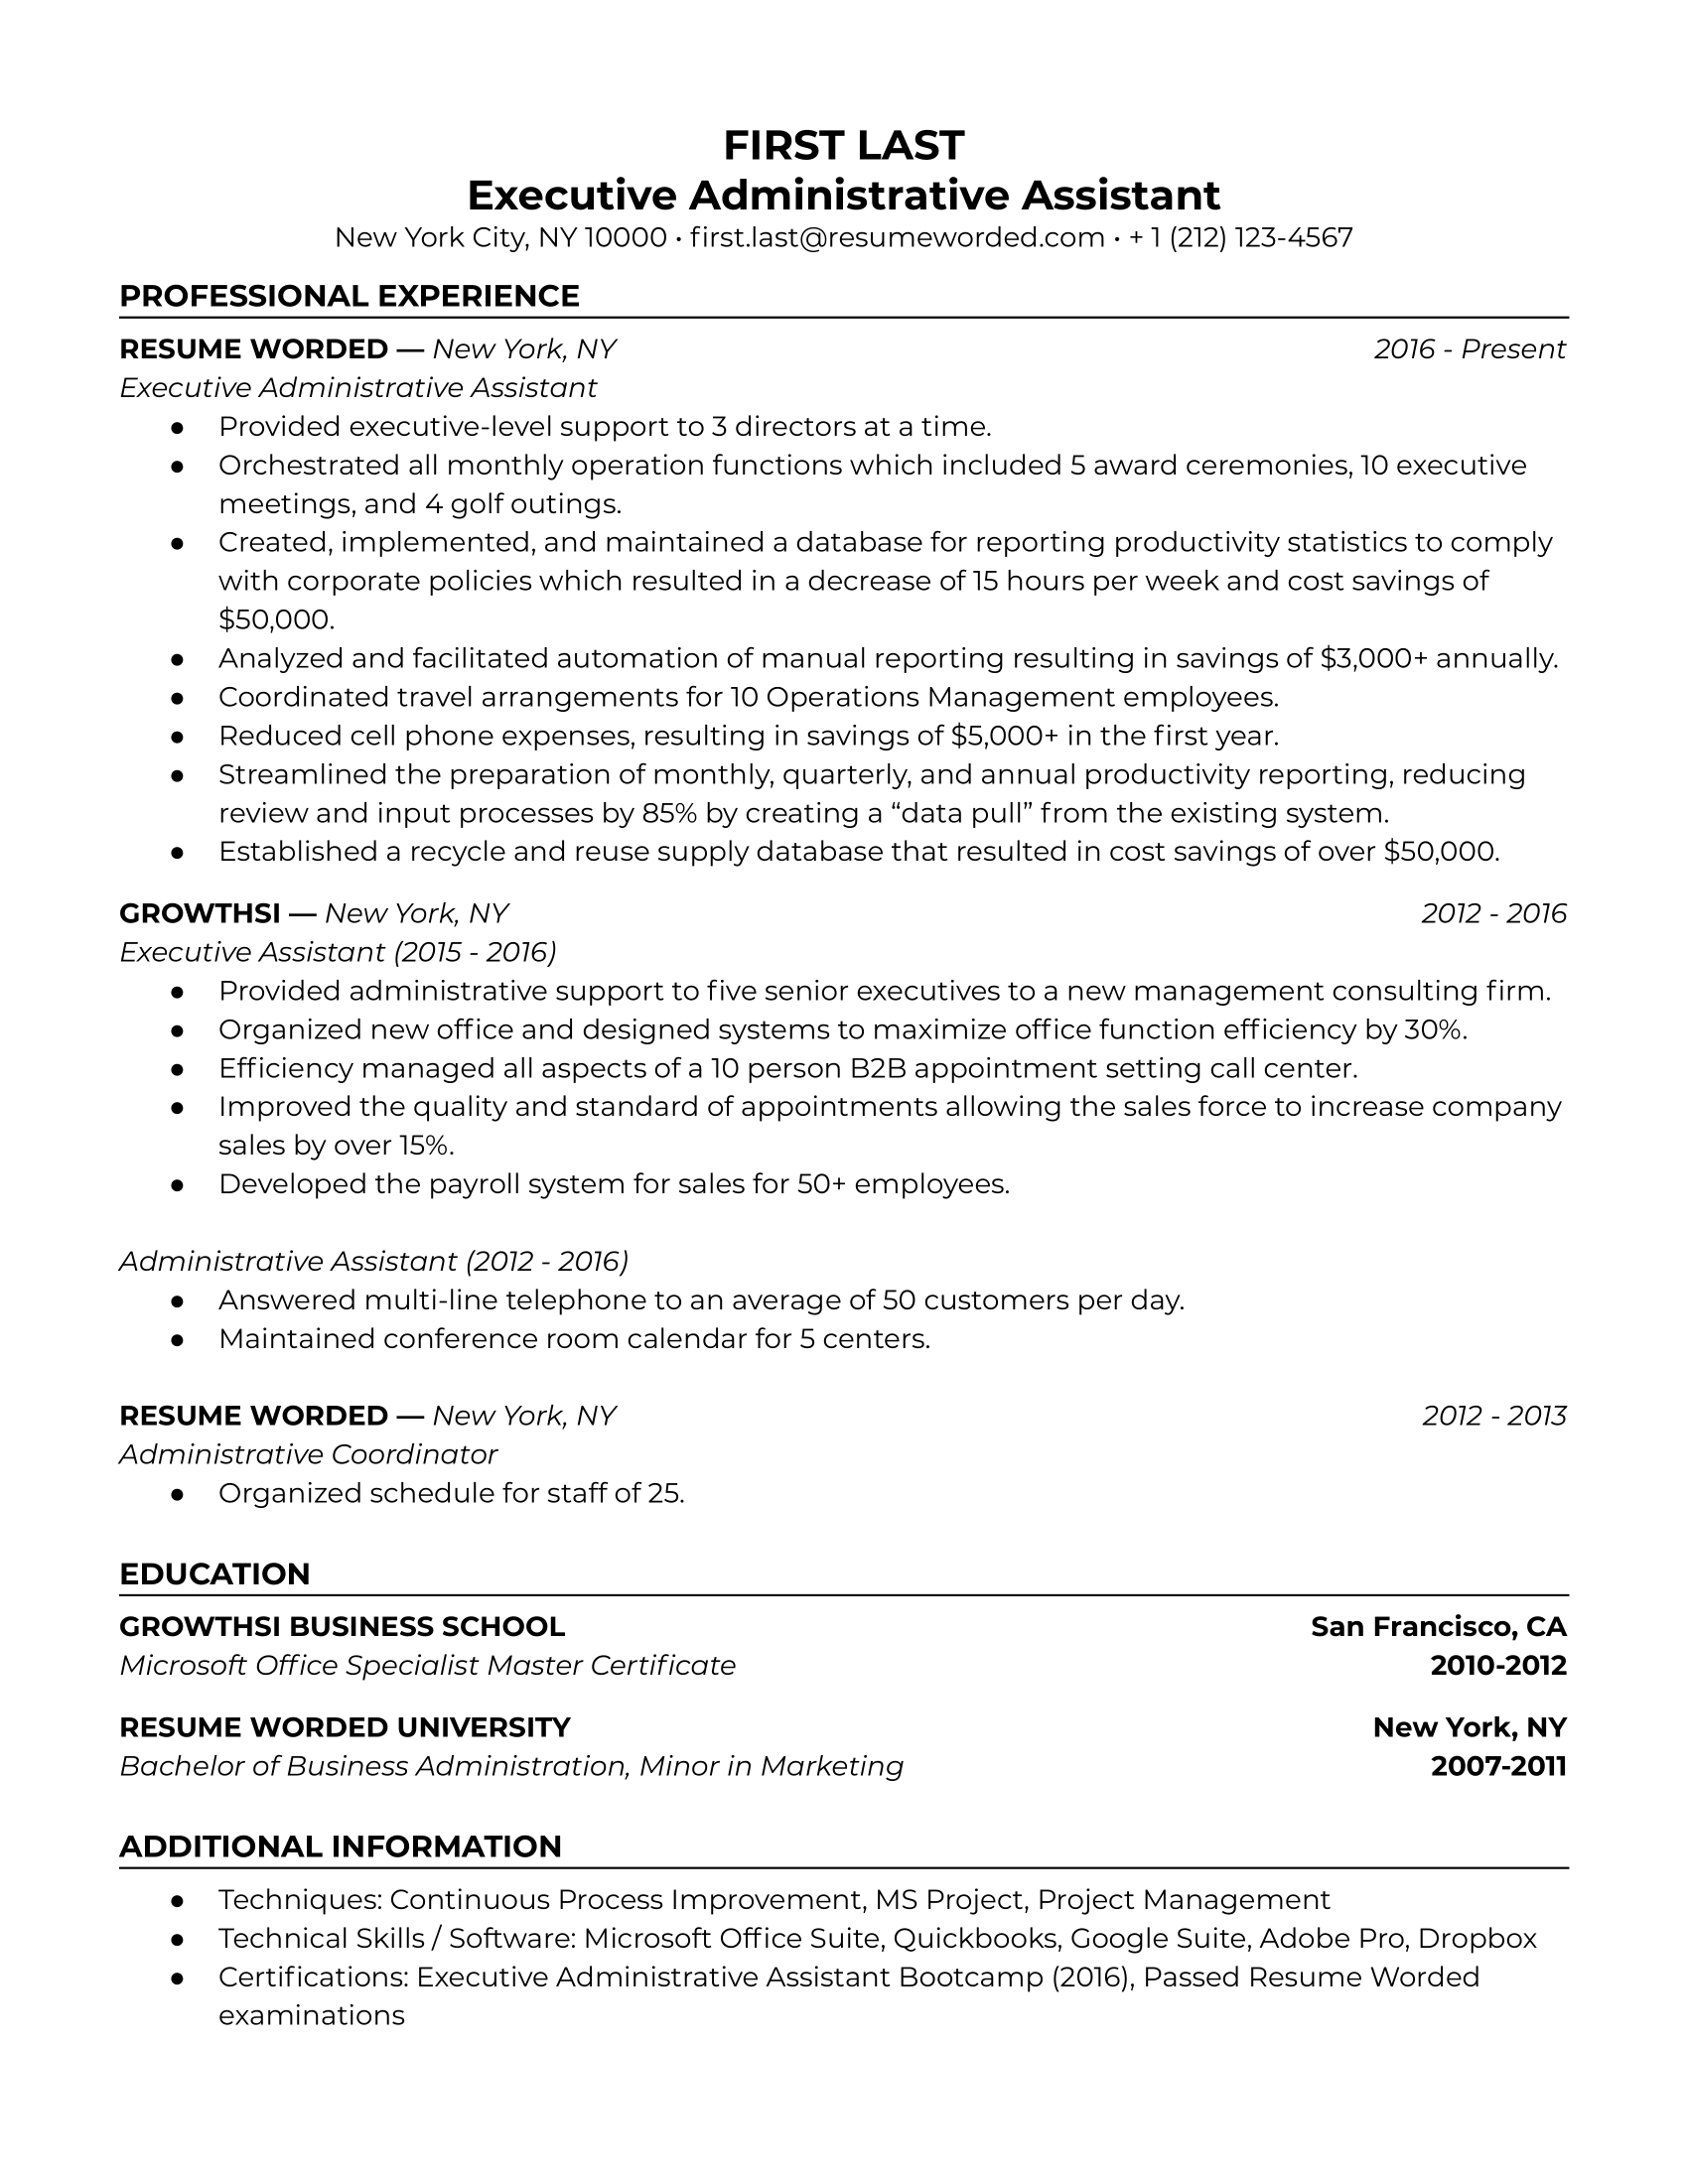 A resume for an executive administrative assistant with a bachelor's degree and experience as an adminstrative and executive assistant.